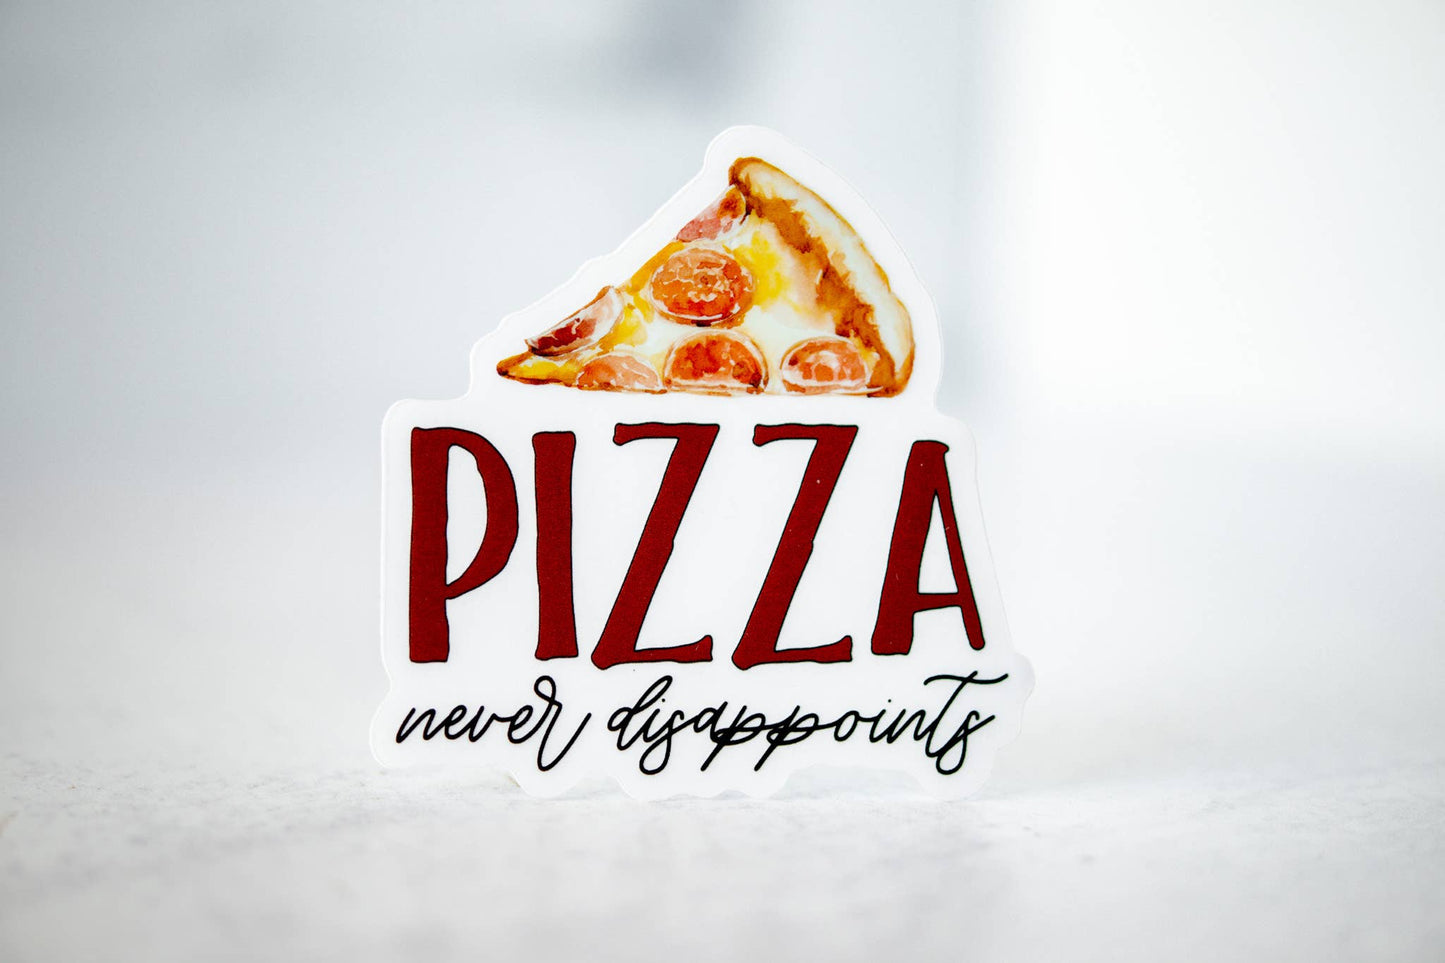 Pizza Never Disappoints, Vinyl Sticker, 3x3 in.